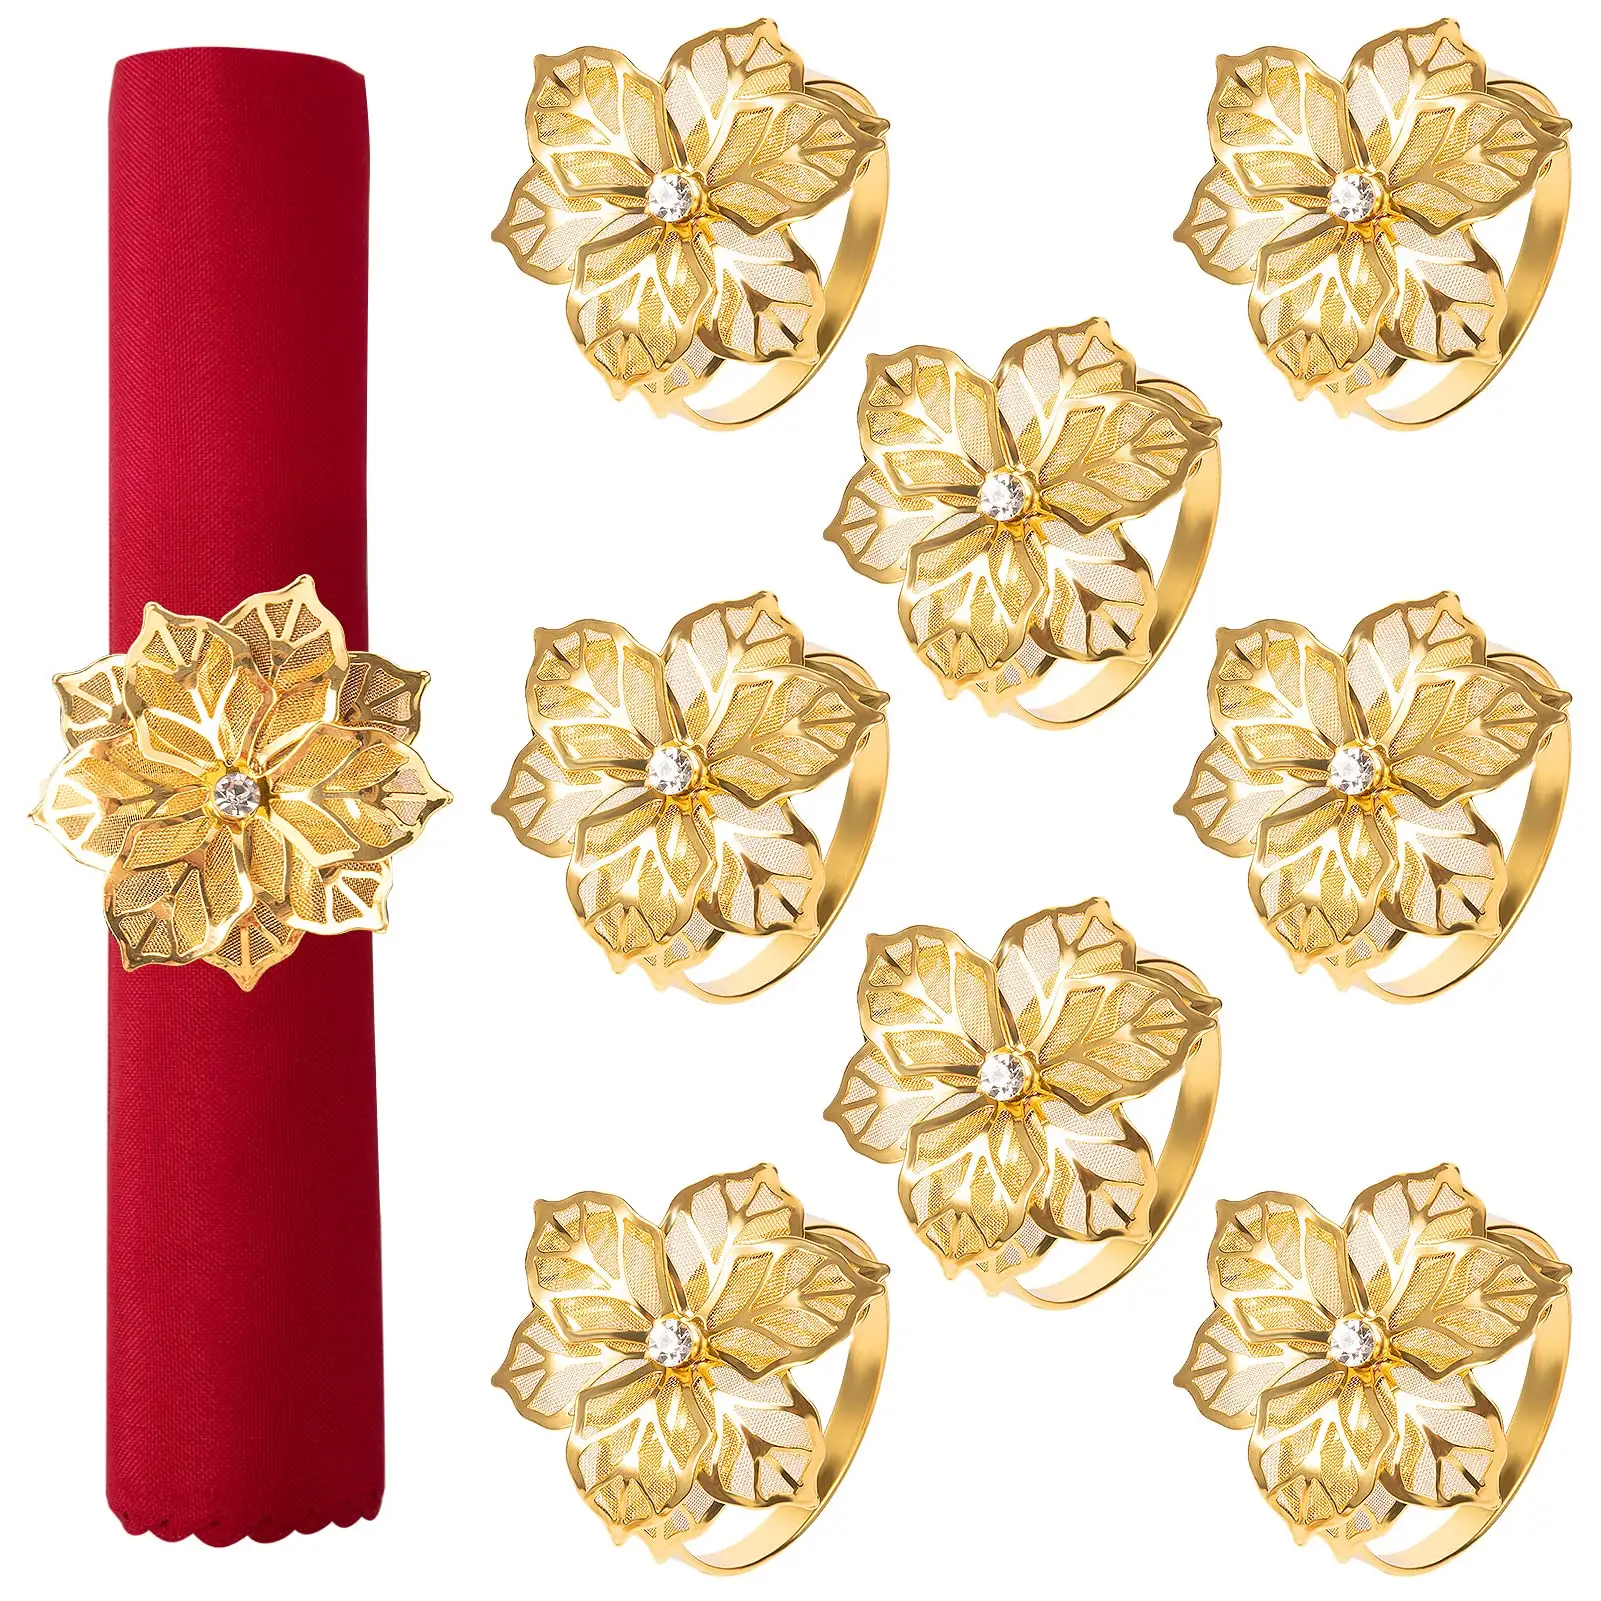 Fashion Design Sense Dining Table Accessories Golden Flower Napkin Ring Metal Tissue Buckle For Banquet Decoration